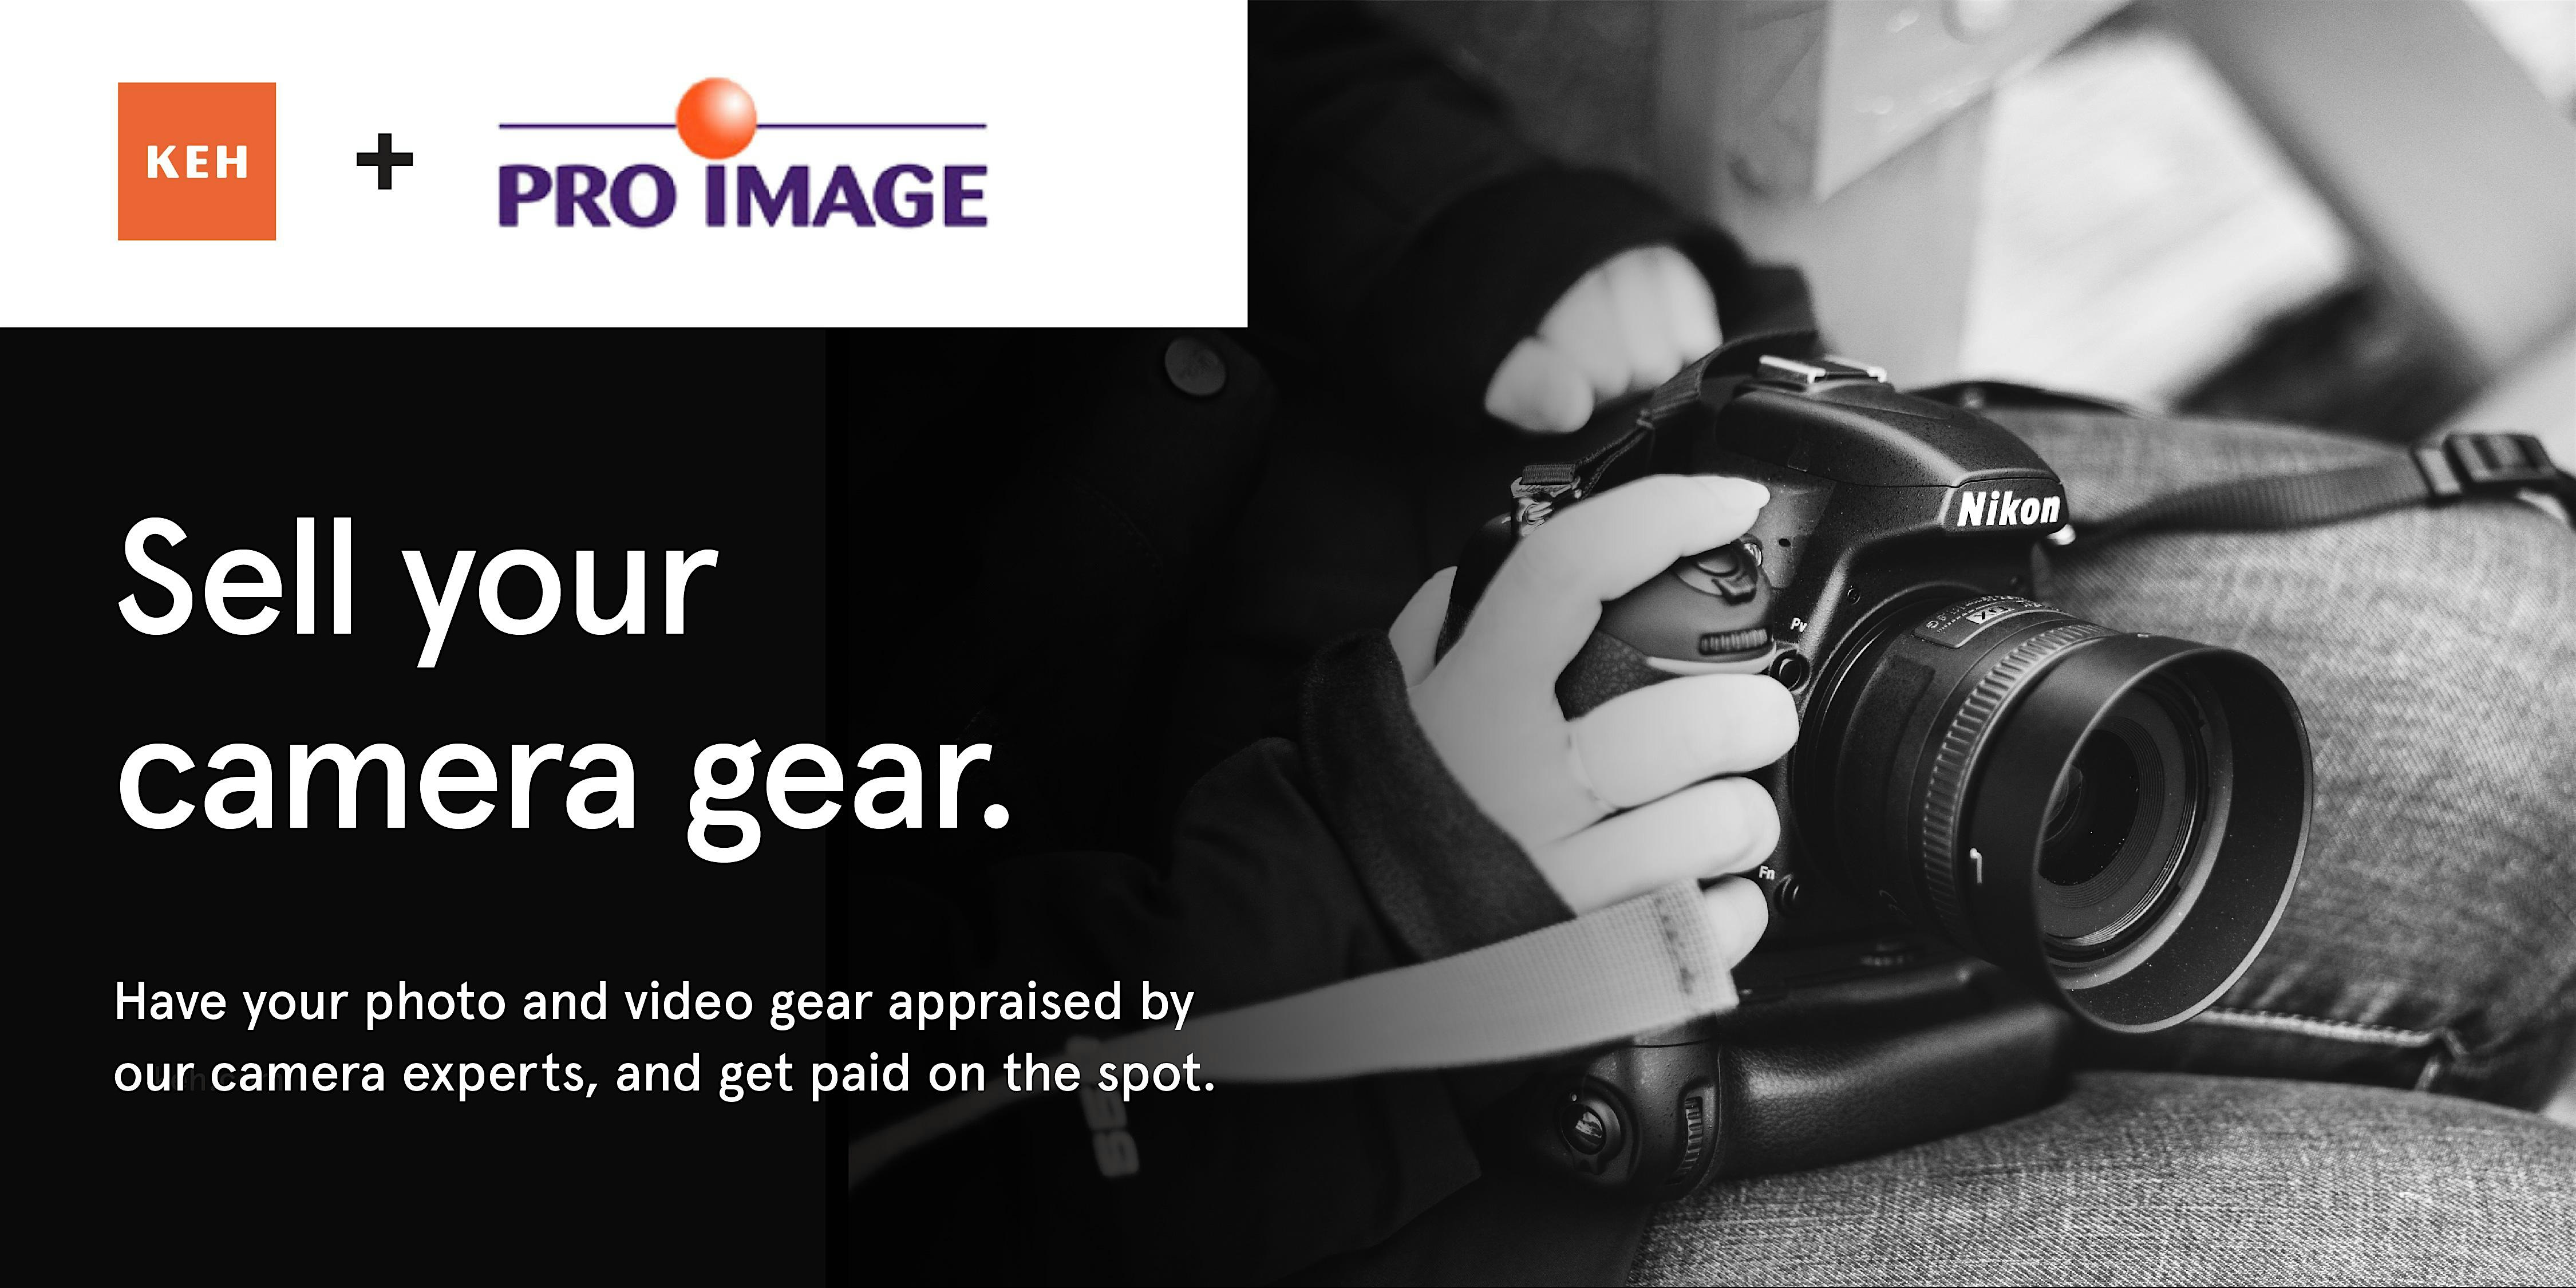 Sell your camera gear (walk-in event) at Pro Image Photo (Amsterdam)